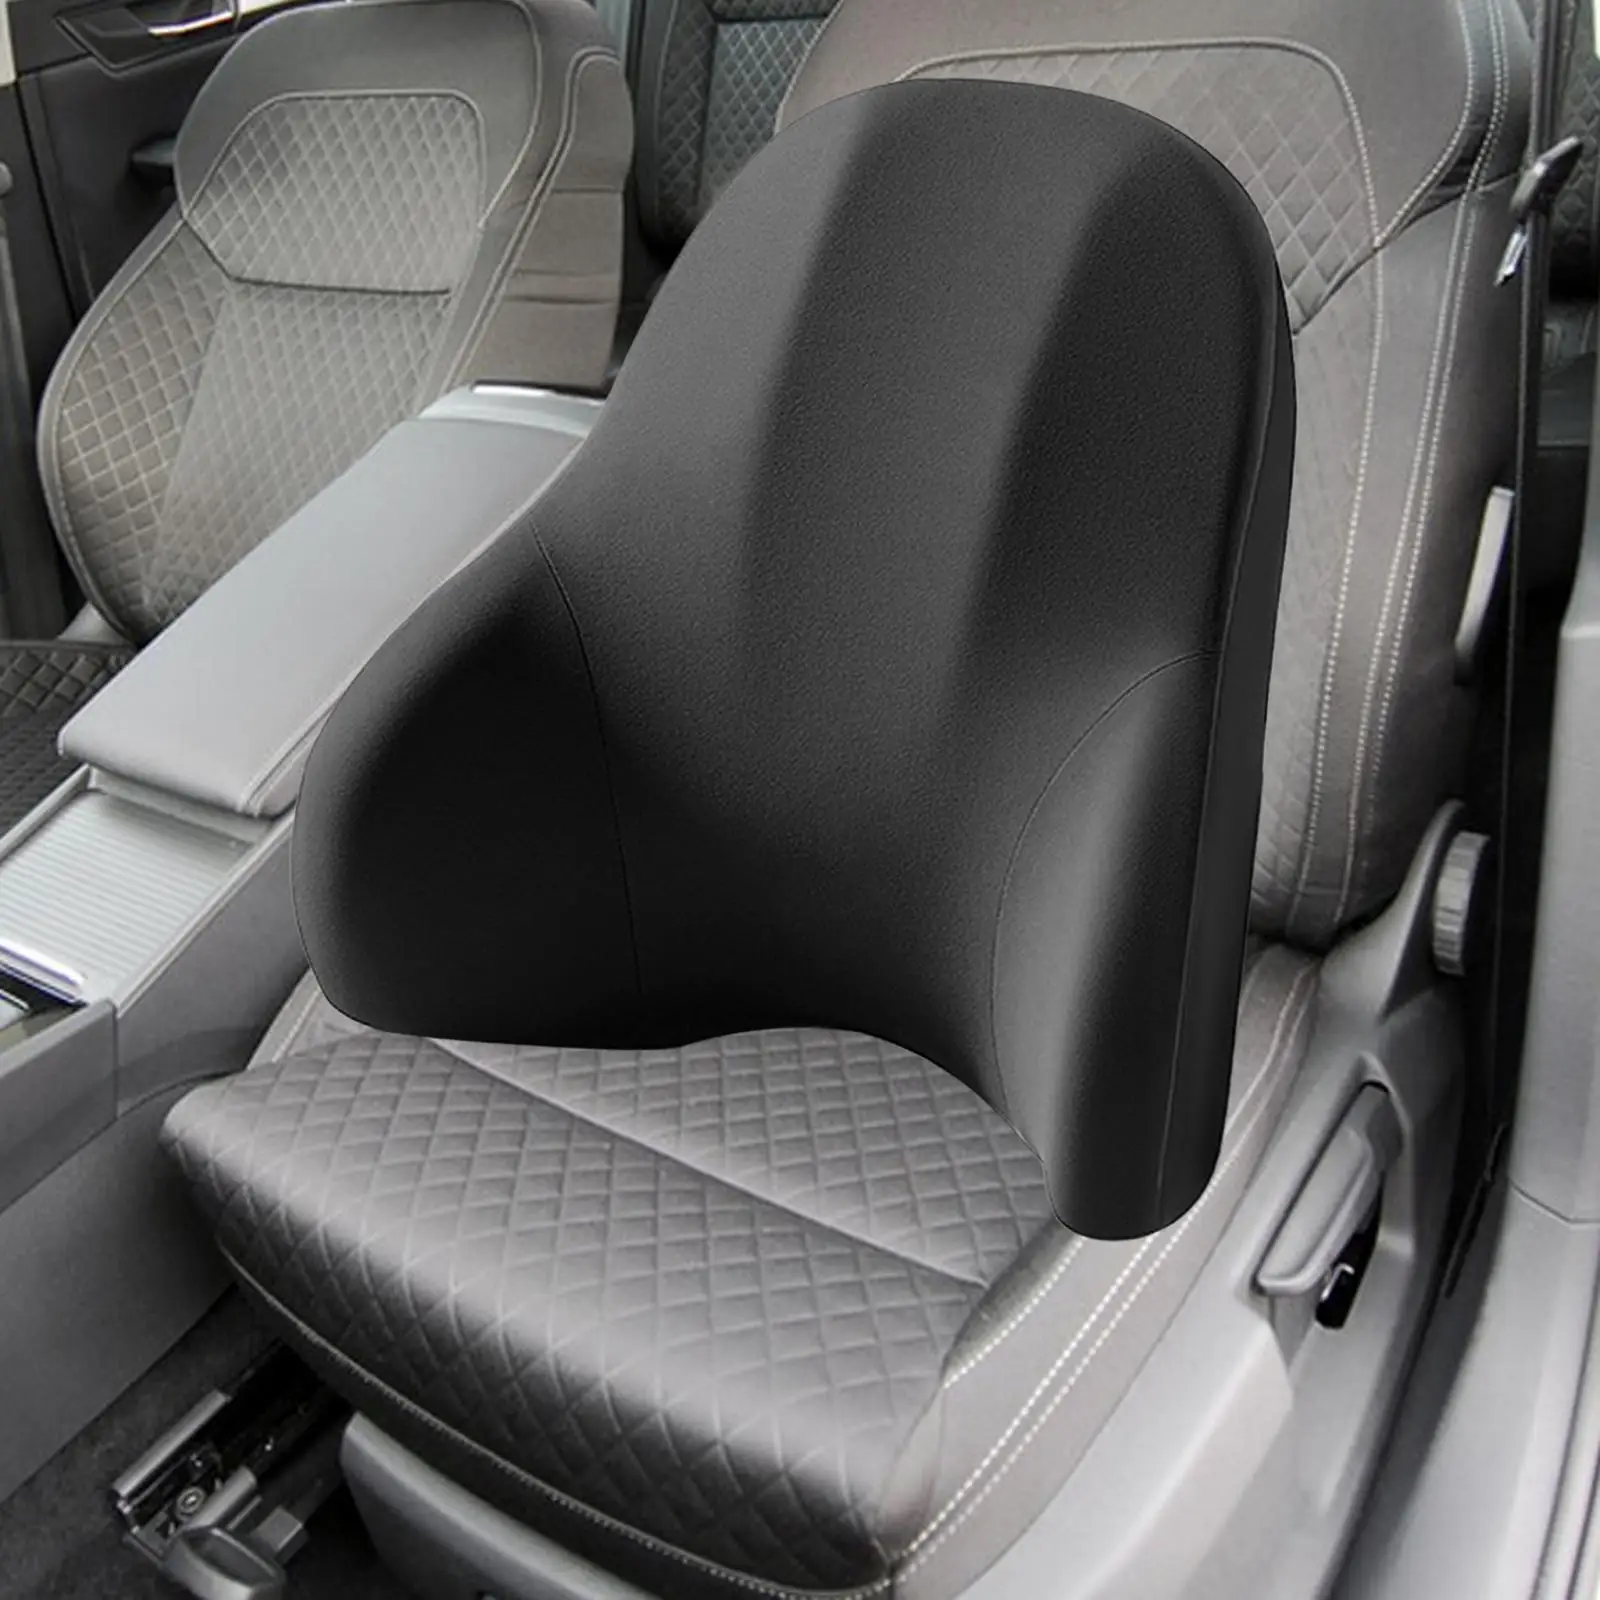 Lumbar Support Pillow for Car Car Lumbar Support Cushion Back Support Cushion for Byd Atto 3 Yuan Plus Car Accessories